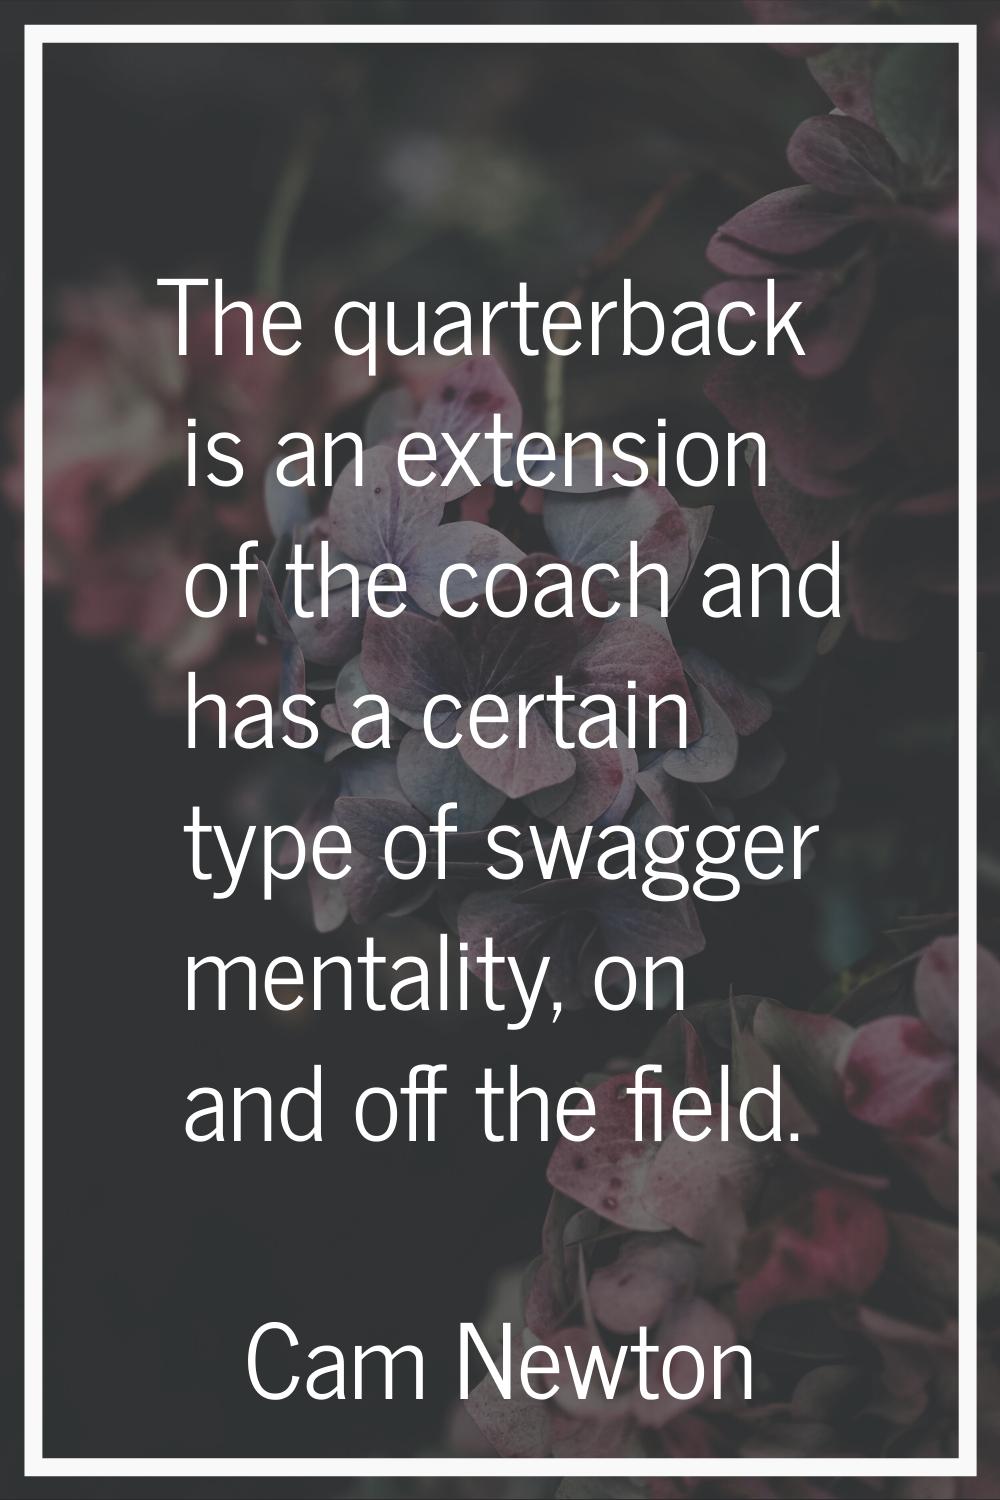 The quarterback is an extension of the coach and has a certain type of swagger mentality, on and of